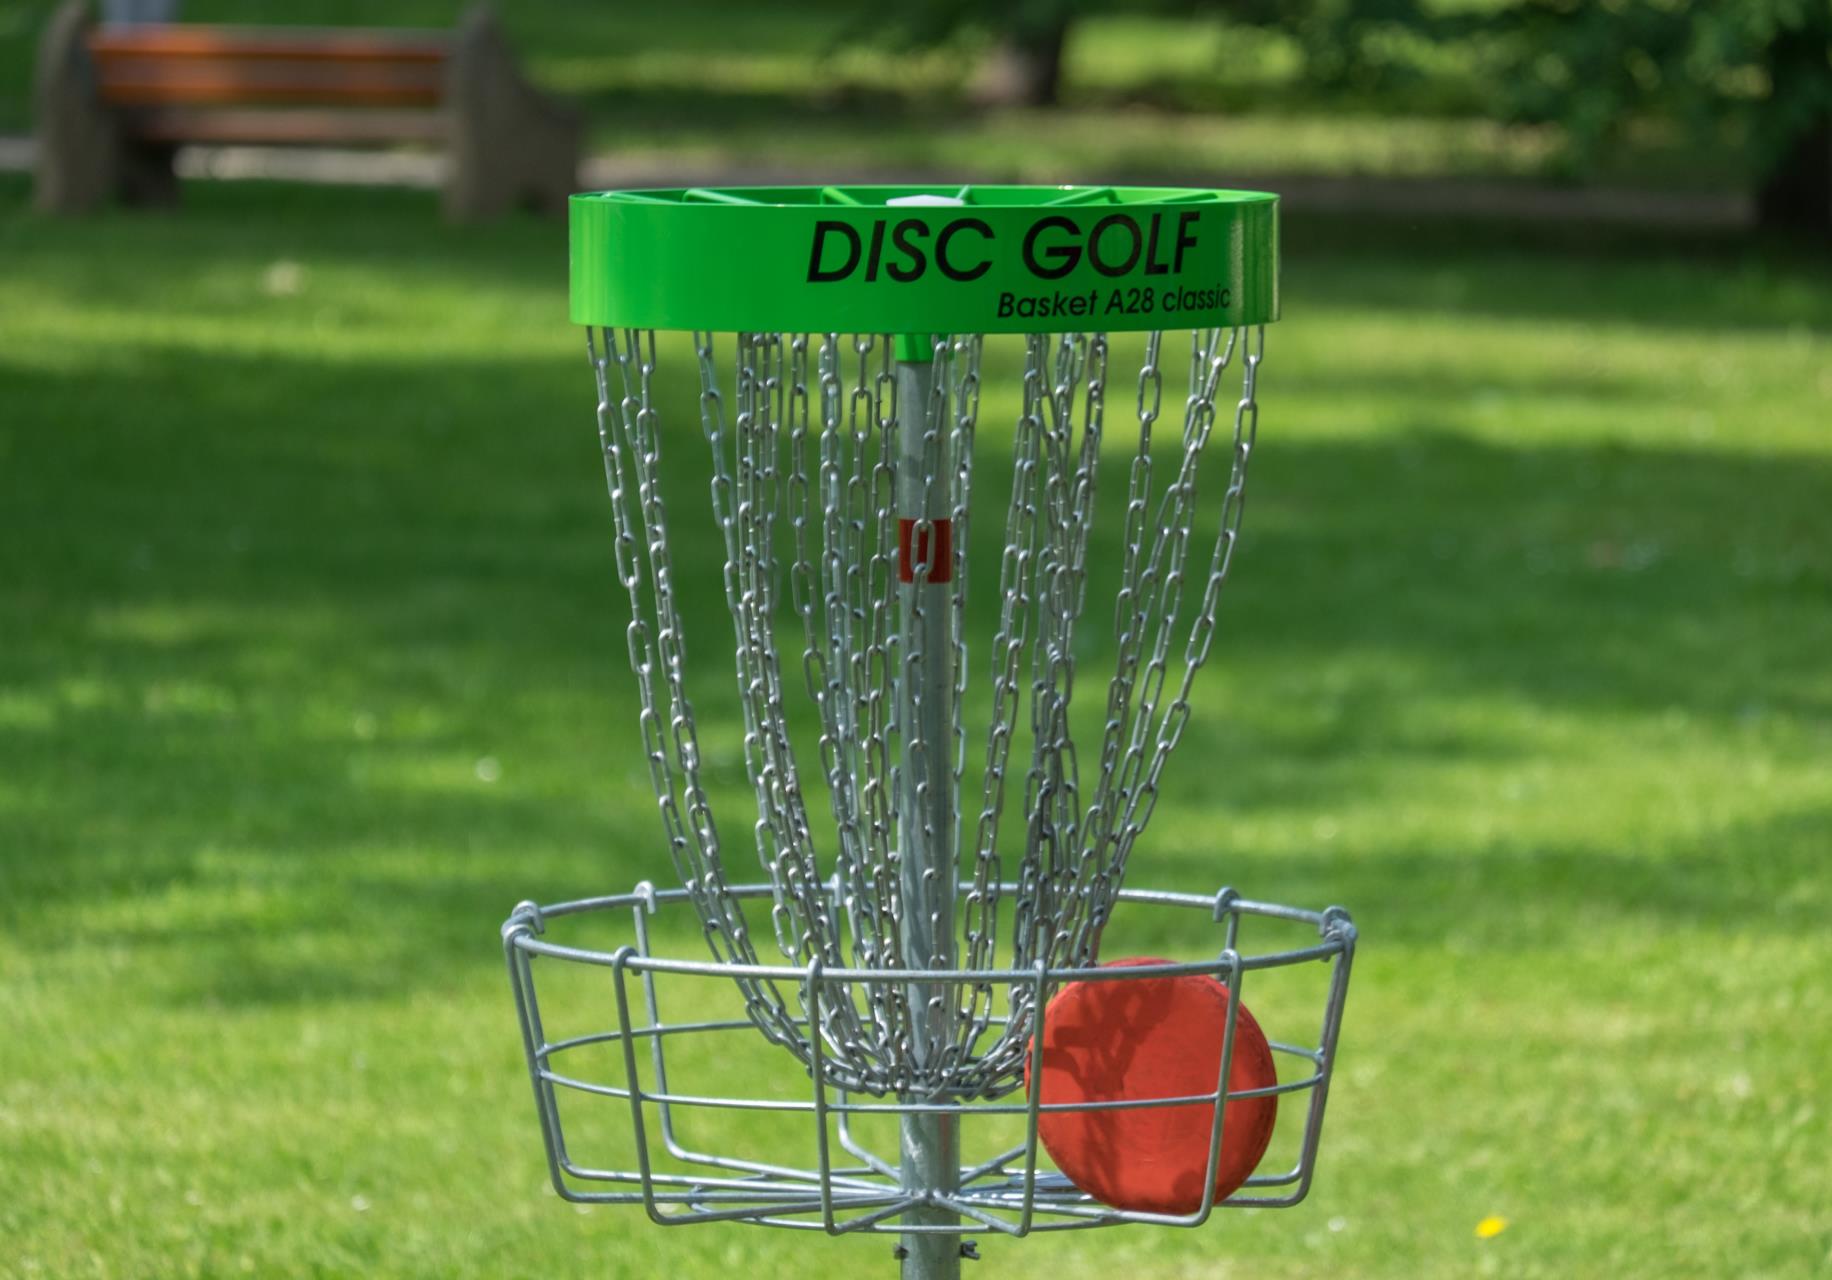 Disc Golf outage